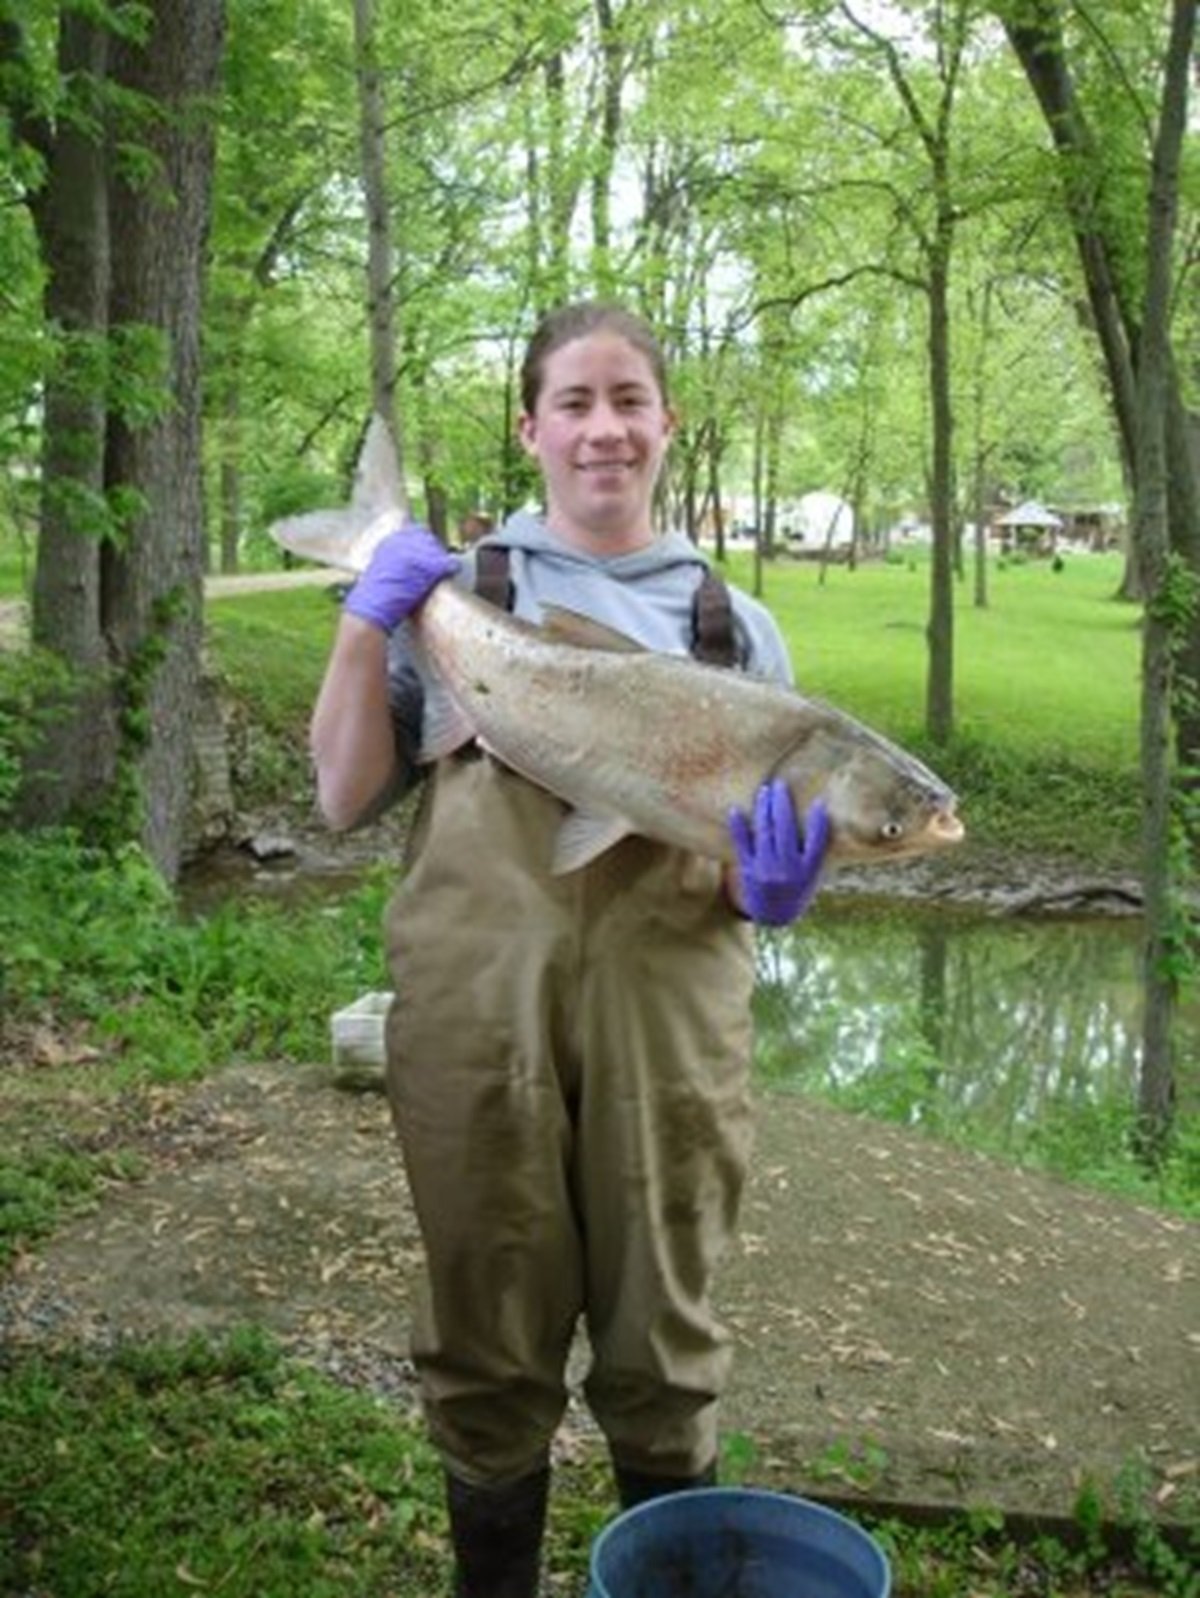 Alison Coulter with an invasive silver carp